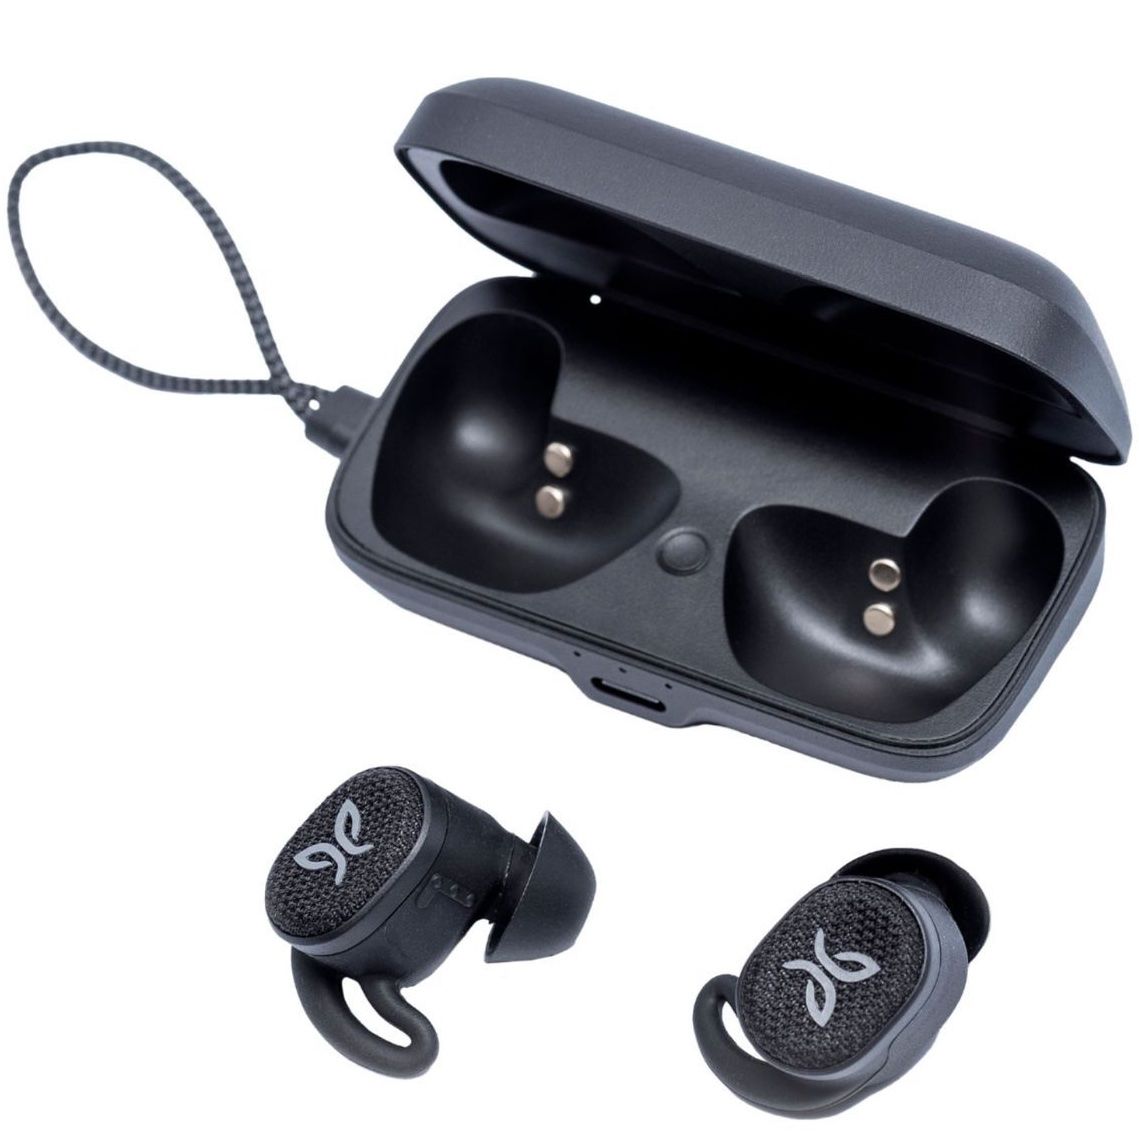 Jaybird Vista 2 earbuds laying at different angles outside the charging case